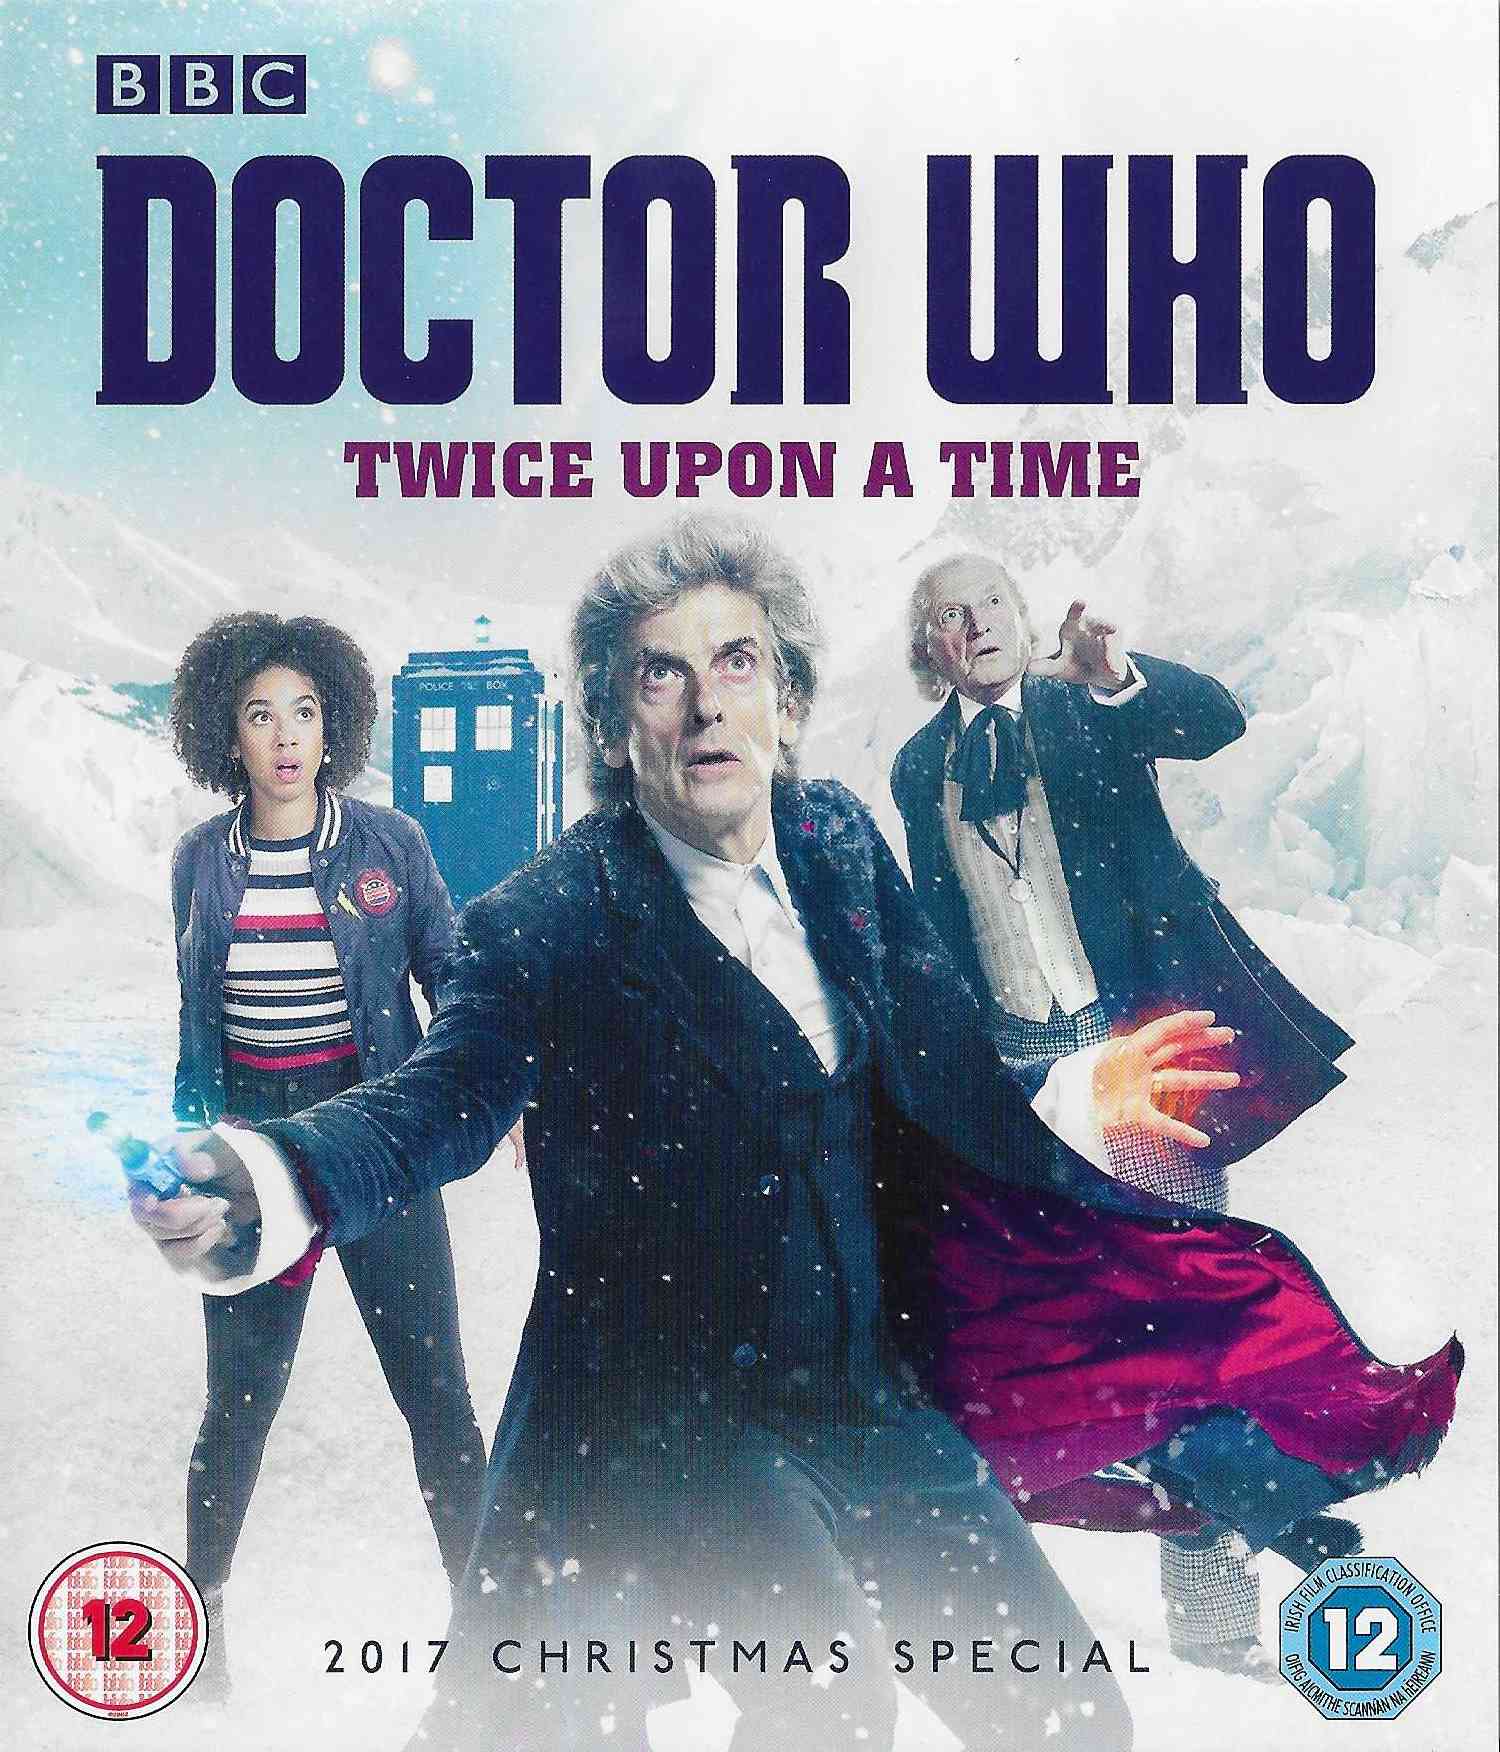 Picture of BBCUHD 0456 Doctor Who - Twice upon a time by artist Stevet Moffat from the BBC records and Tapes library